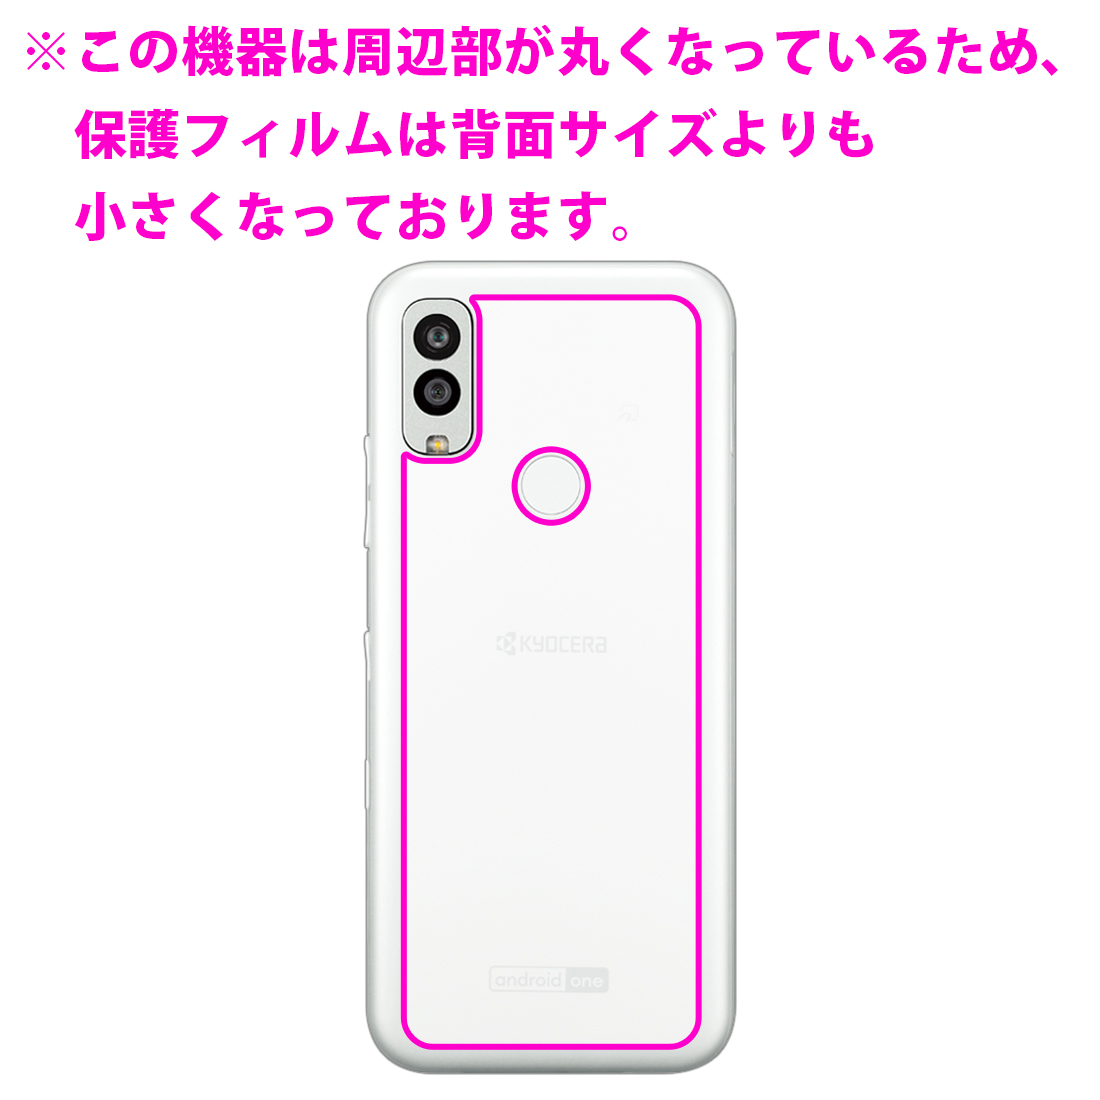 Android One S10対応 Crystal Shield 保護 フィルム [両面セット] 光沢 日本製｜pdar｜03